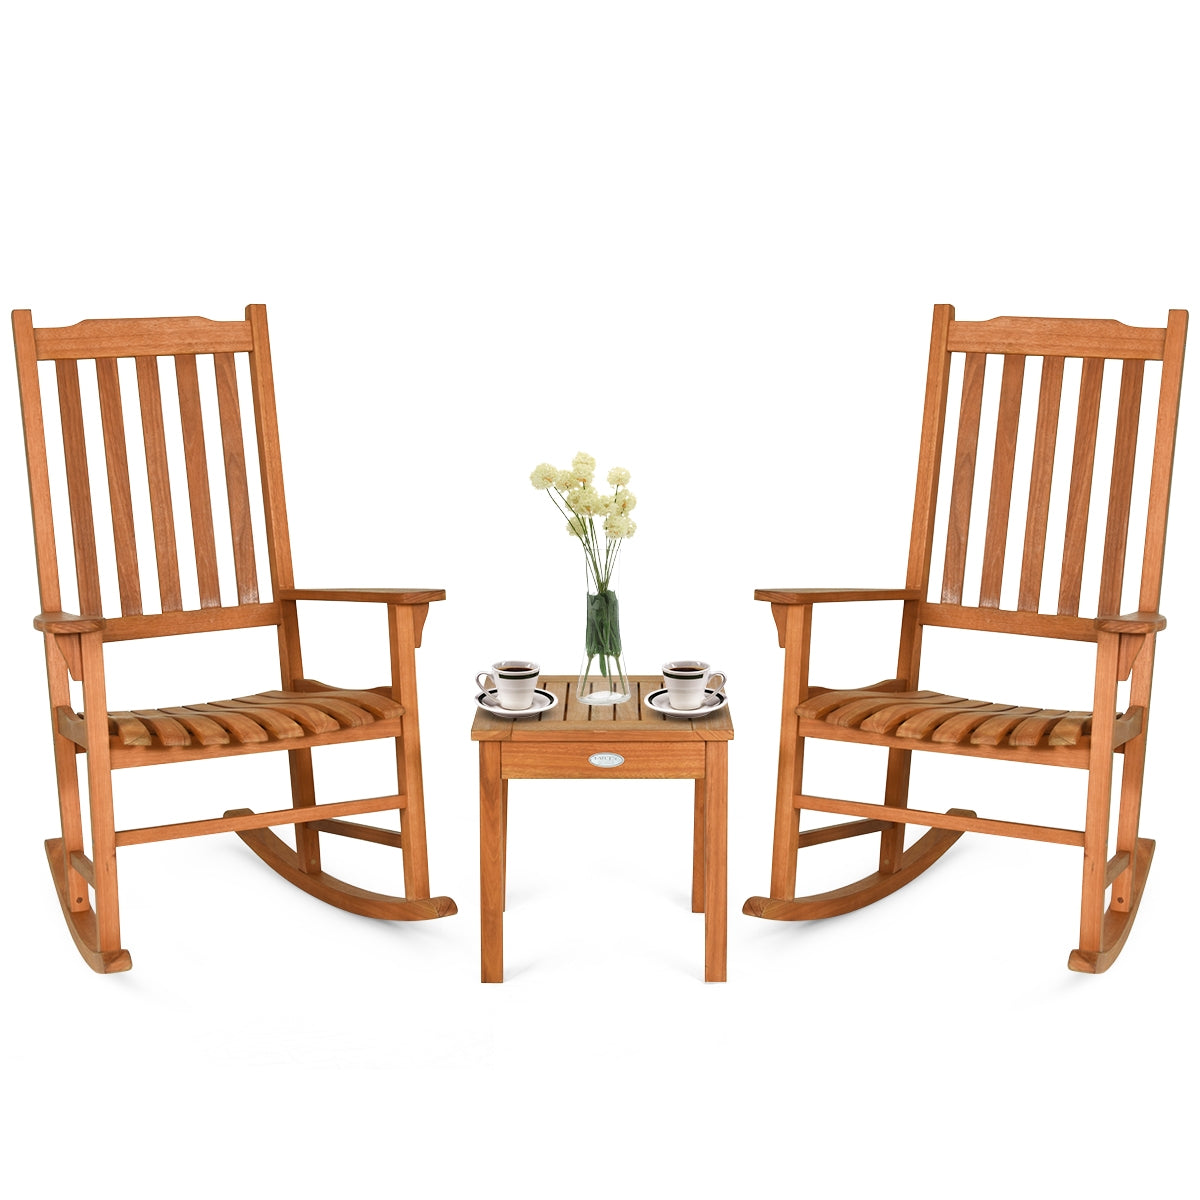 Hikidspace 3 Pieces Eucalyptus Rocking Chair Set with Coffee Table